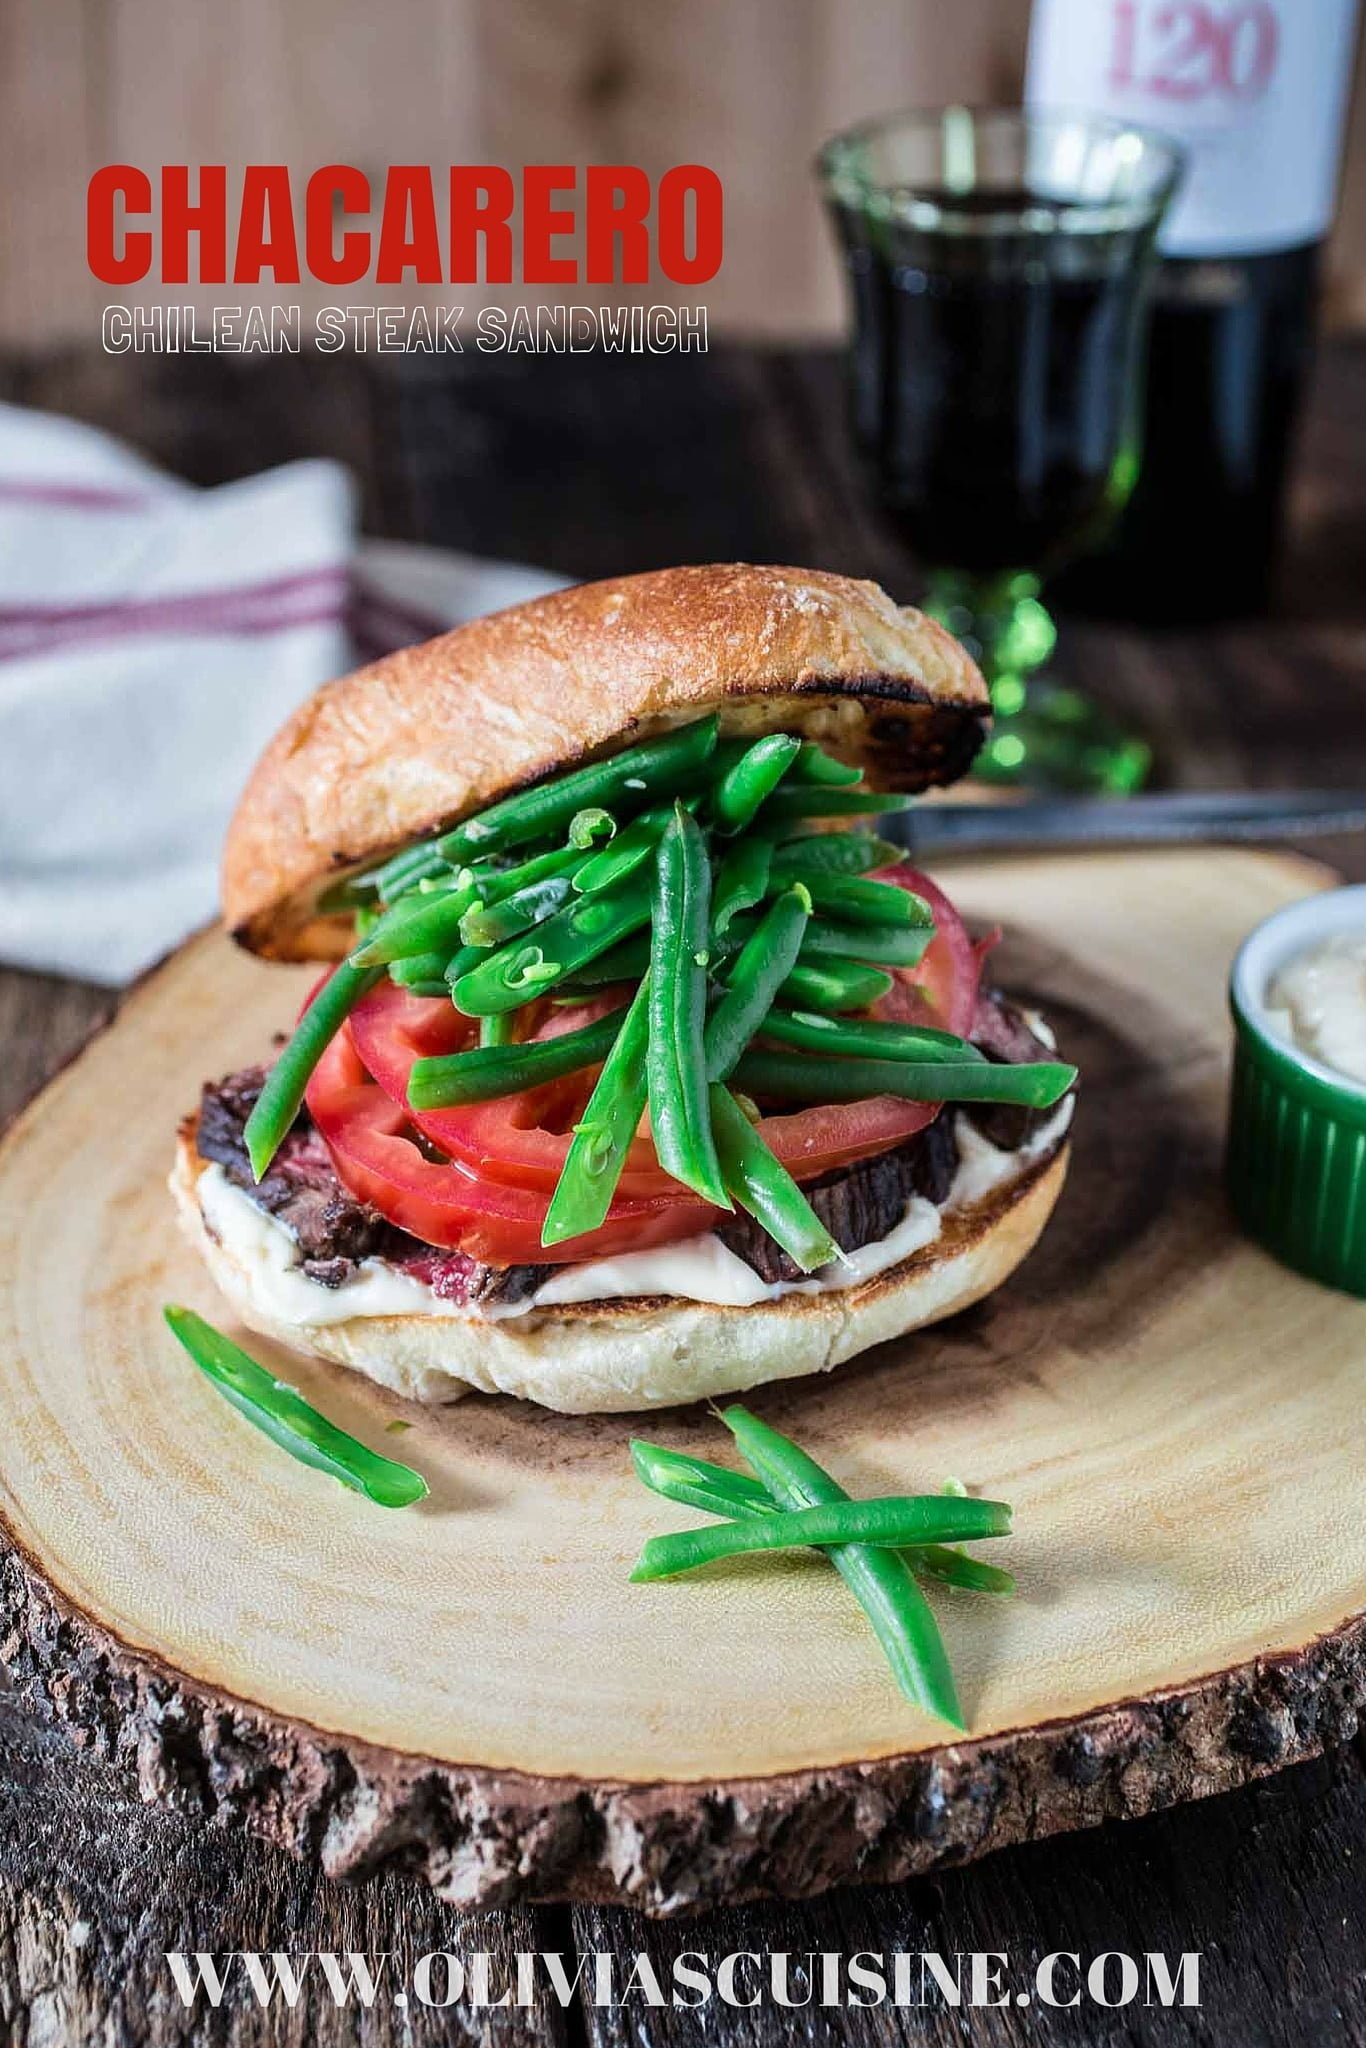 Chacarero (Chilean Steak Sandwich) | www.oliviascuisine.com | This is Chile's national sandwich. It consists of a roll piled high with grilled meat, tomatoes, a dollop of mayo, hot sauce and green beans! (Food styling and photography by Olivia Mesquita.) 